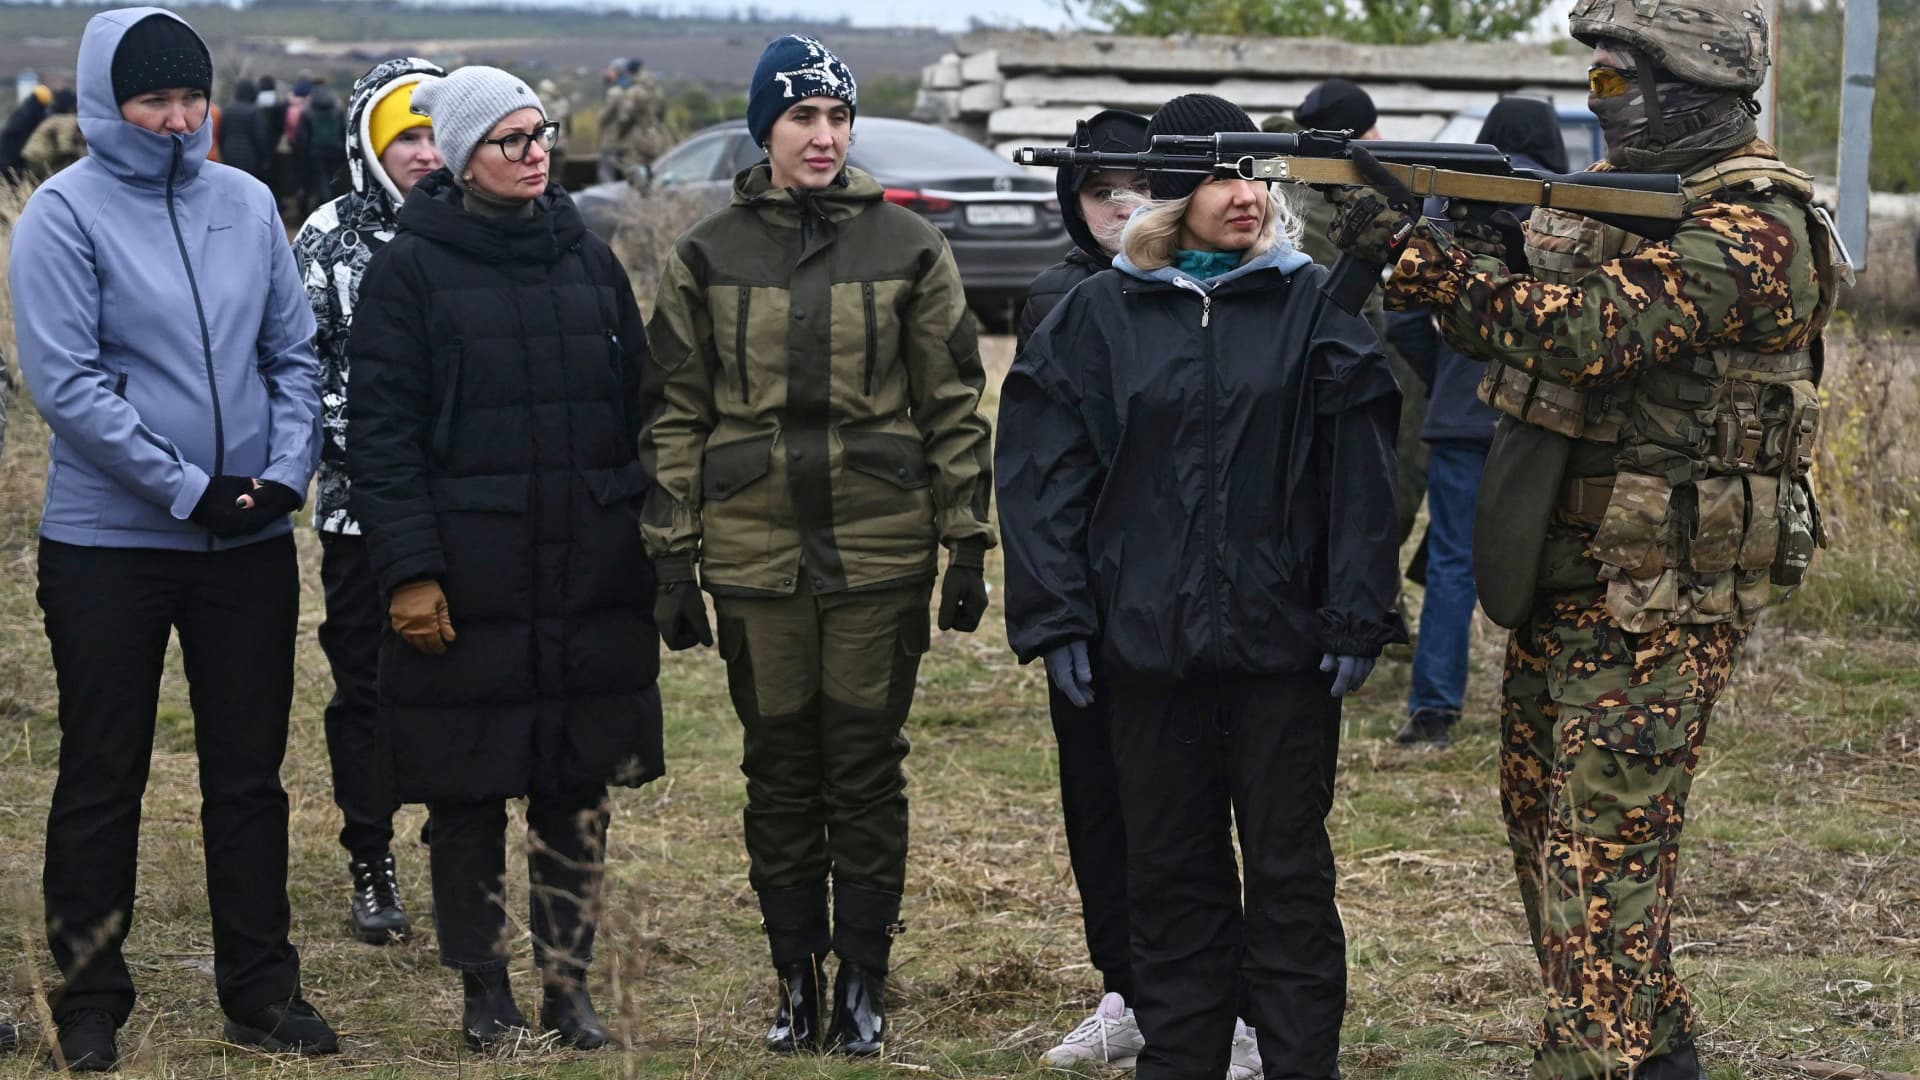 Participants listen to the instructor during a combat training session for civilians organised by local authorities at a range in Rostov Region, Russia October 21, 2022.